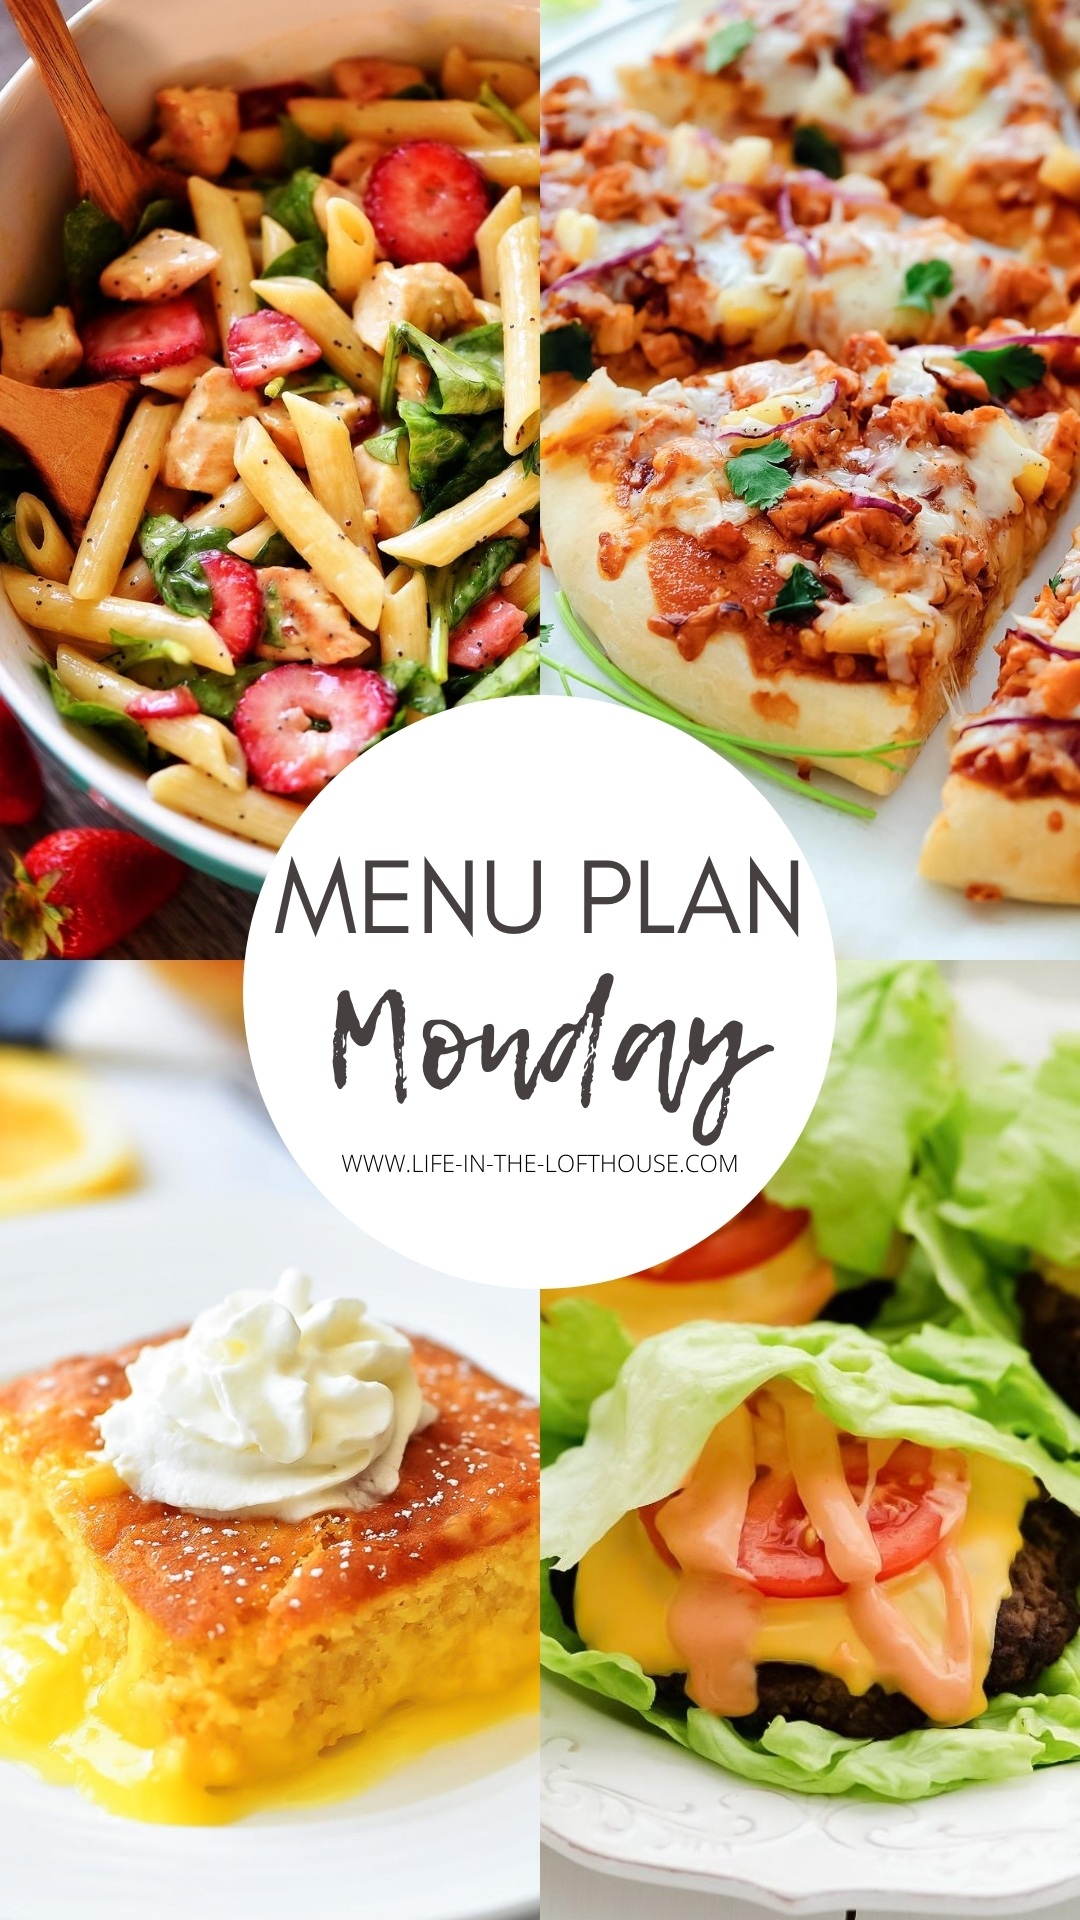 Menu Plan Monday is a weekly menu with delicious dinner recipes. All of the recipes are easy to follow and great for busy weeknights!